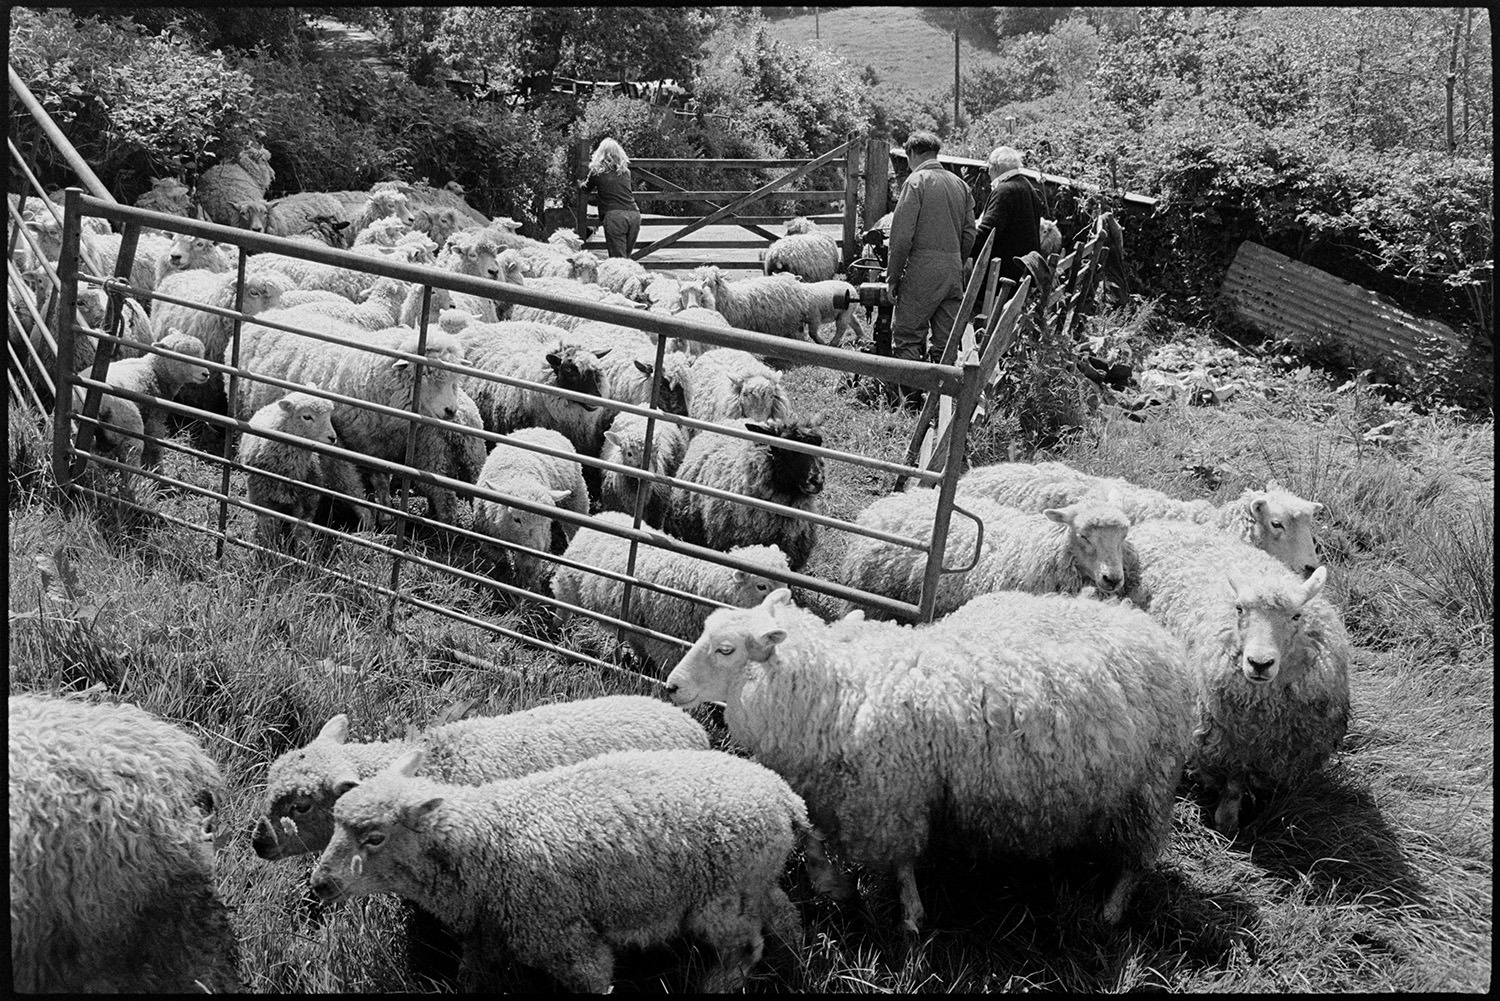 Man and woman farmer removing dirty wool from sheep's bottoms.
[Archie Parkhouse, Jo Curzon and another man releasing sheep from a pen, after docking them, into a field at Millhams, Dolton.]